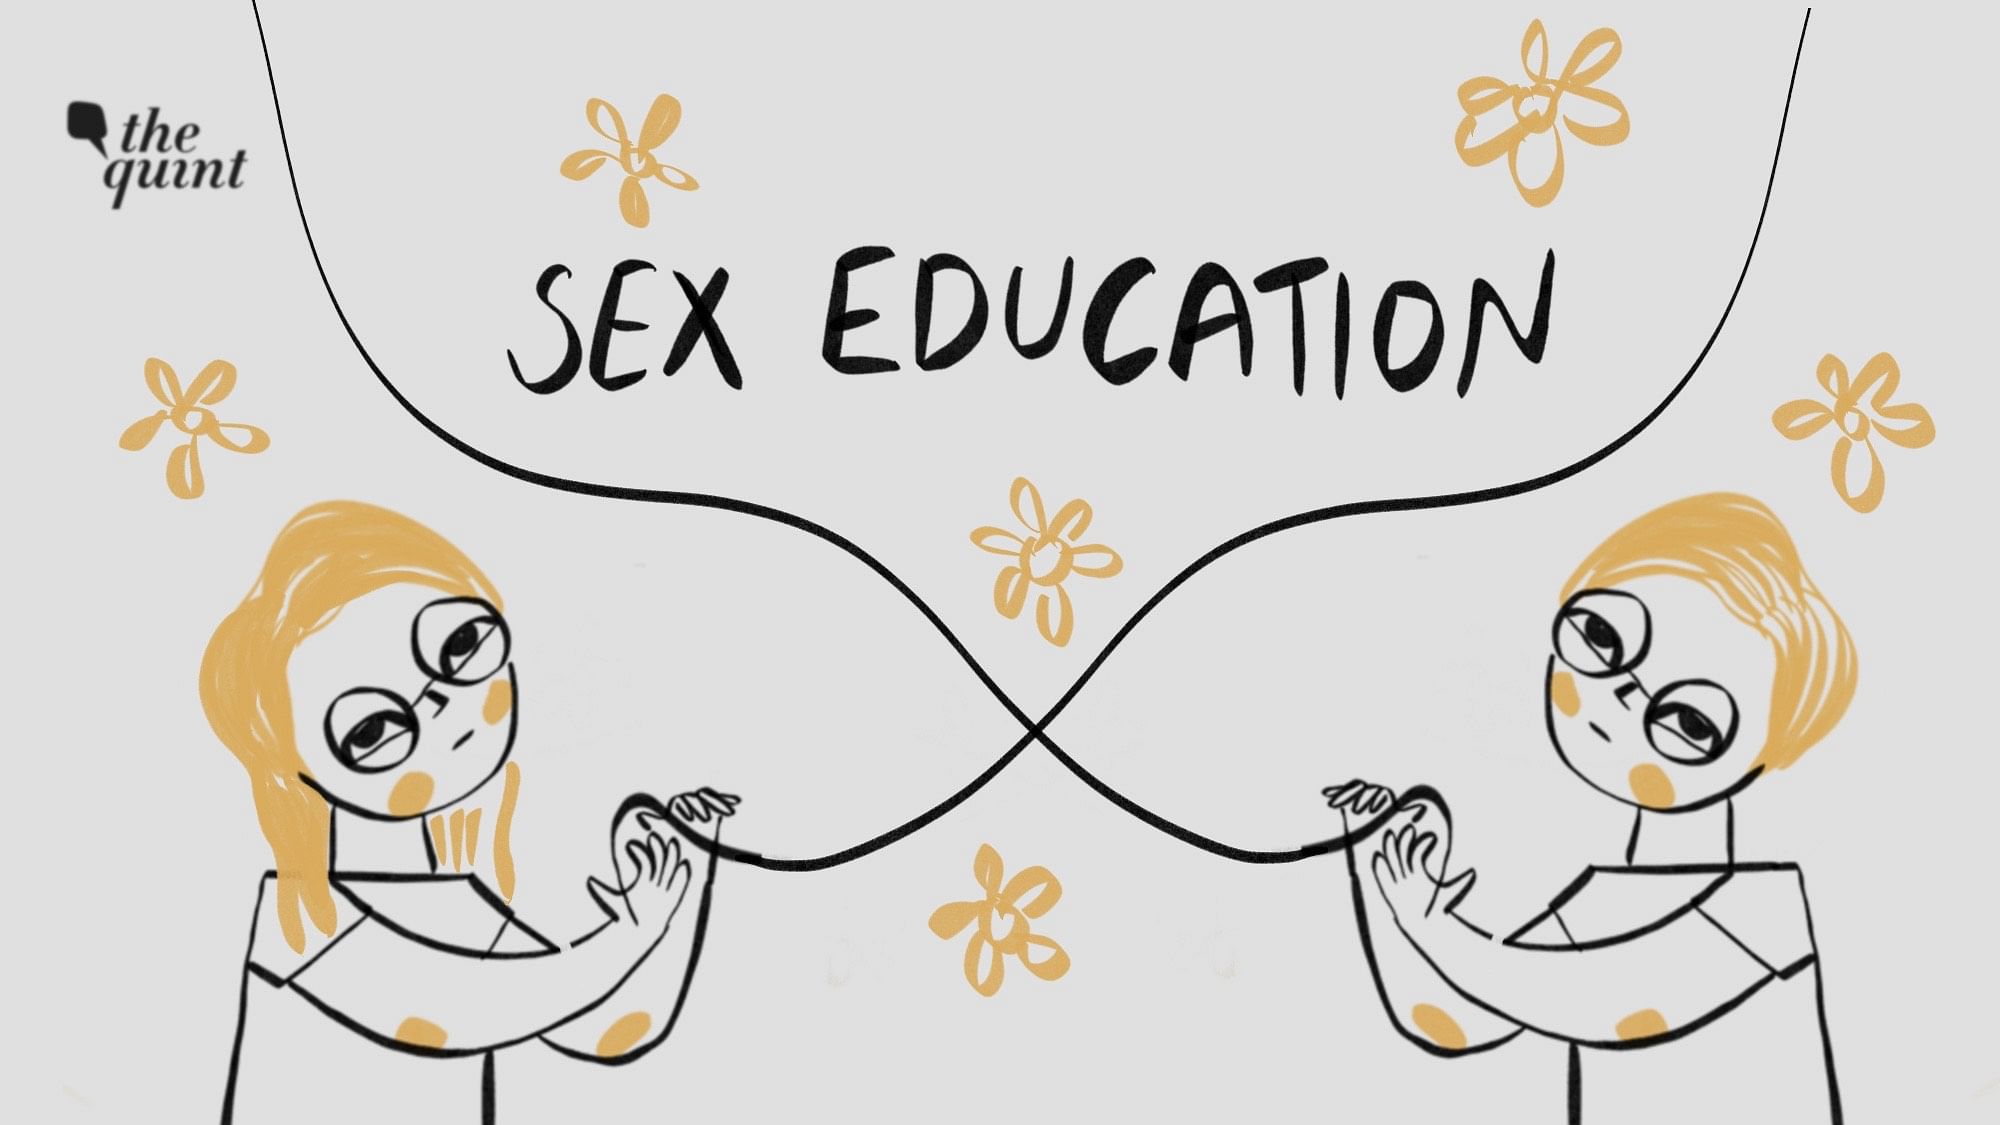 The need for comprehensive sex education